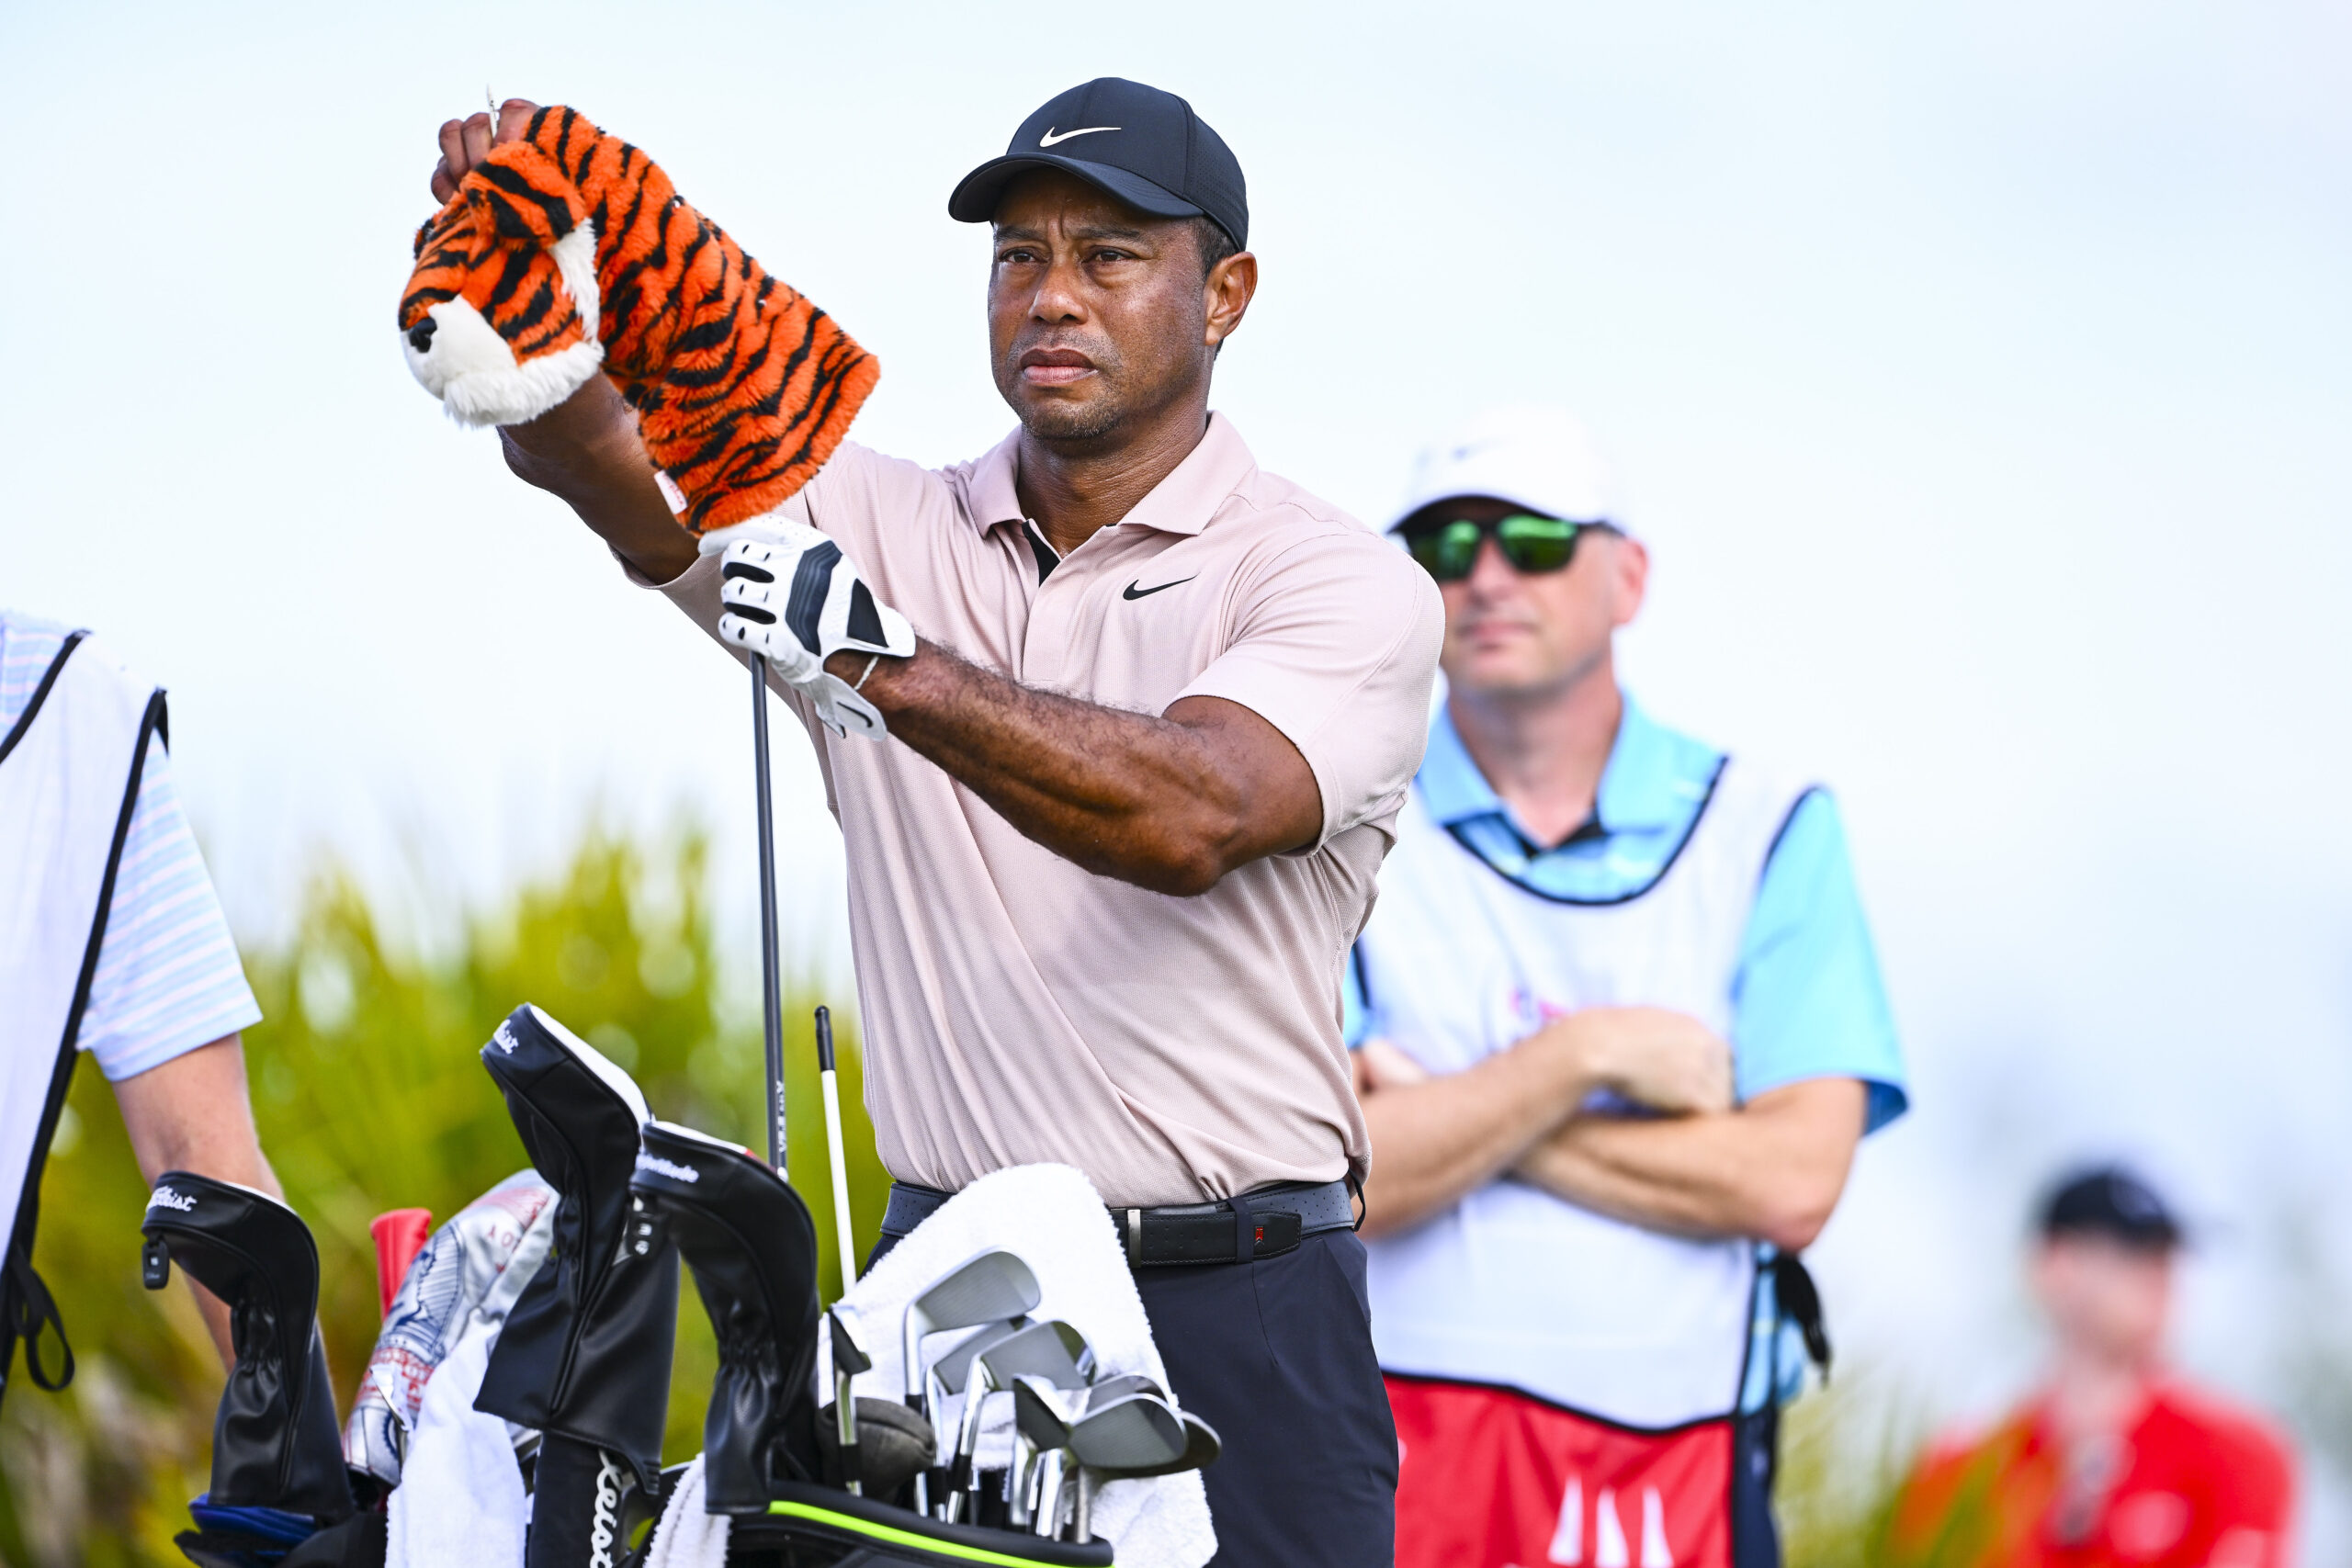 The 14 best Nike ads and commercials featuring Tiger Woods